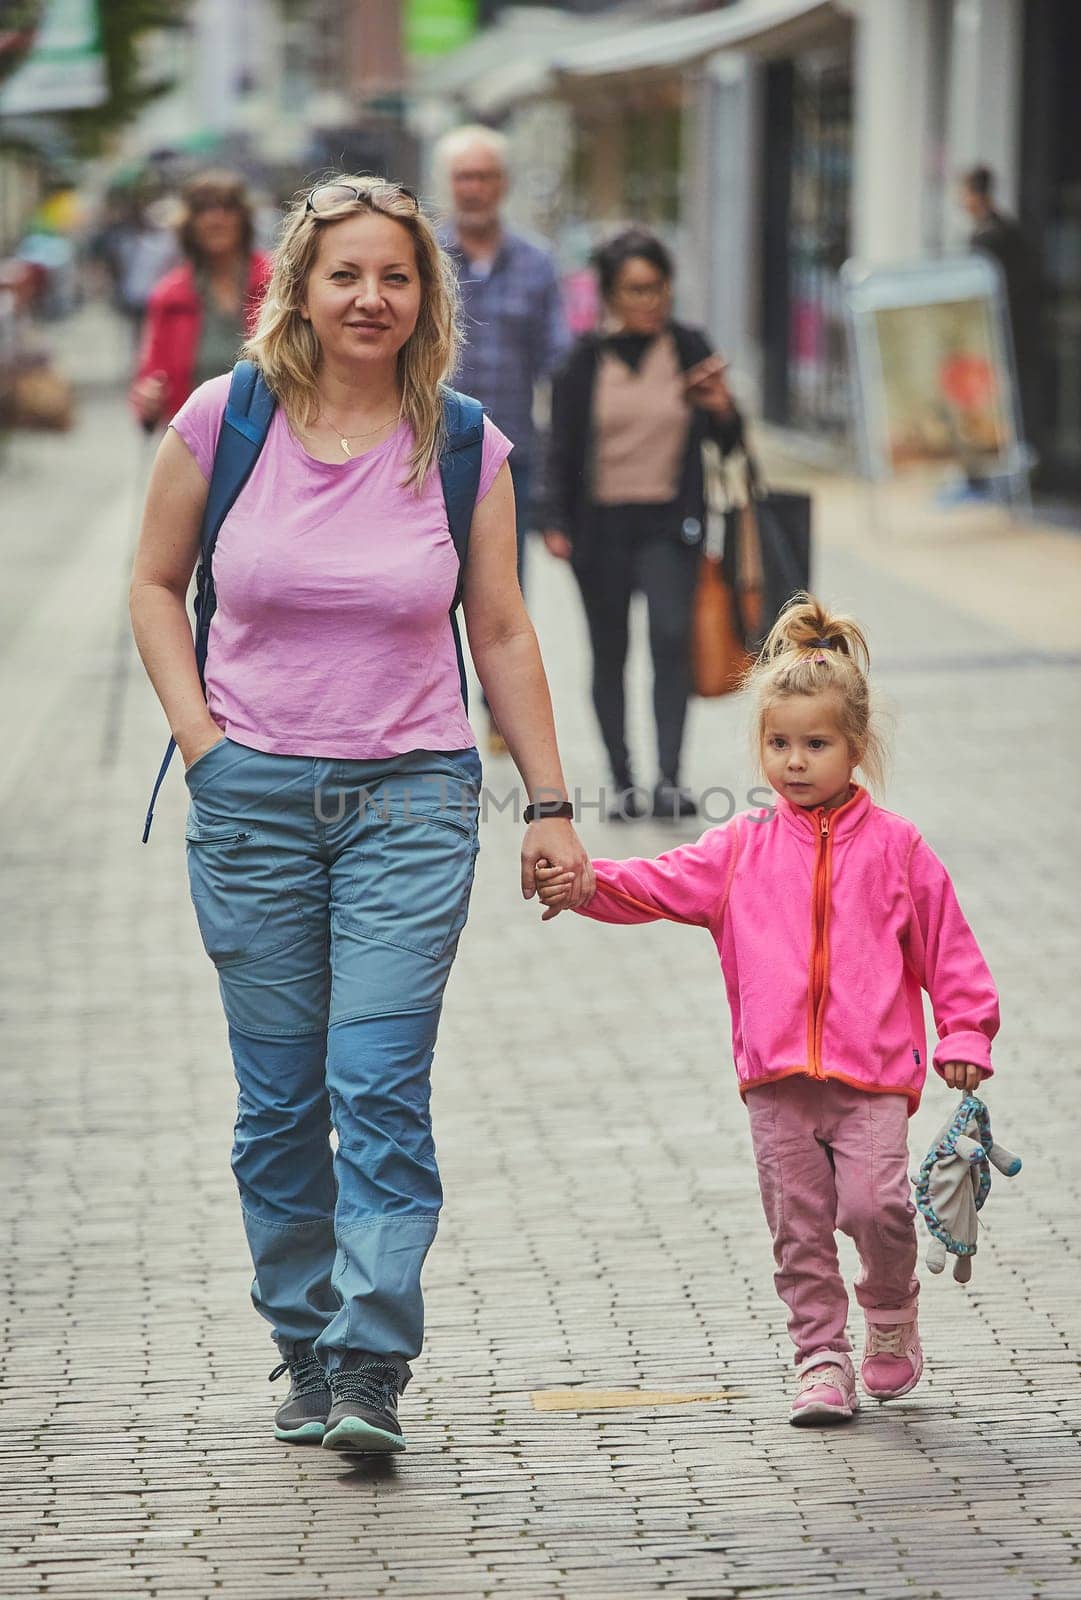 Mom and daughter walk around the city in the Netherlands.